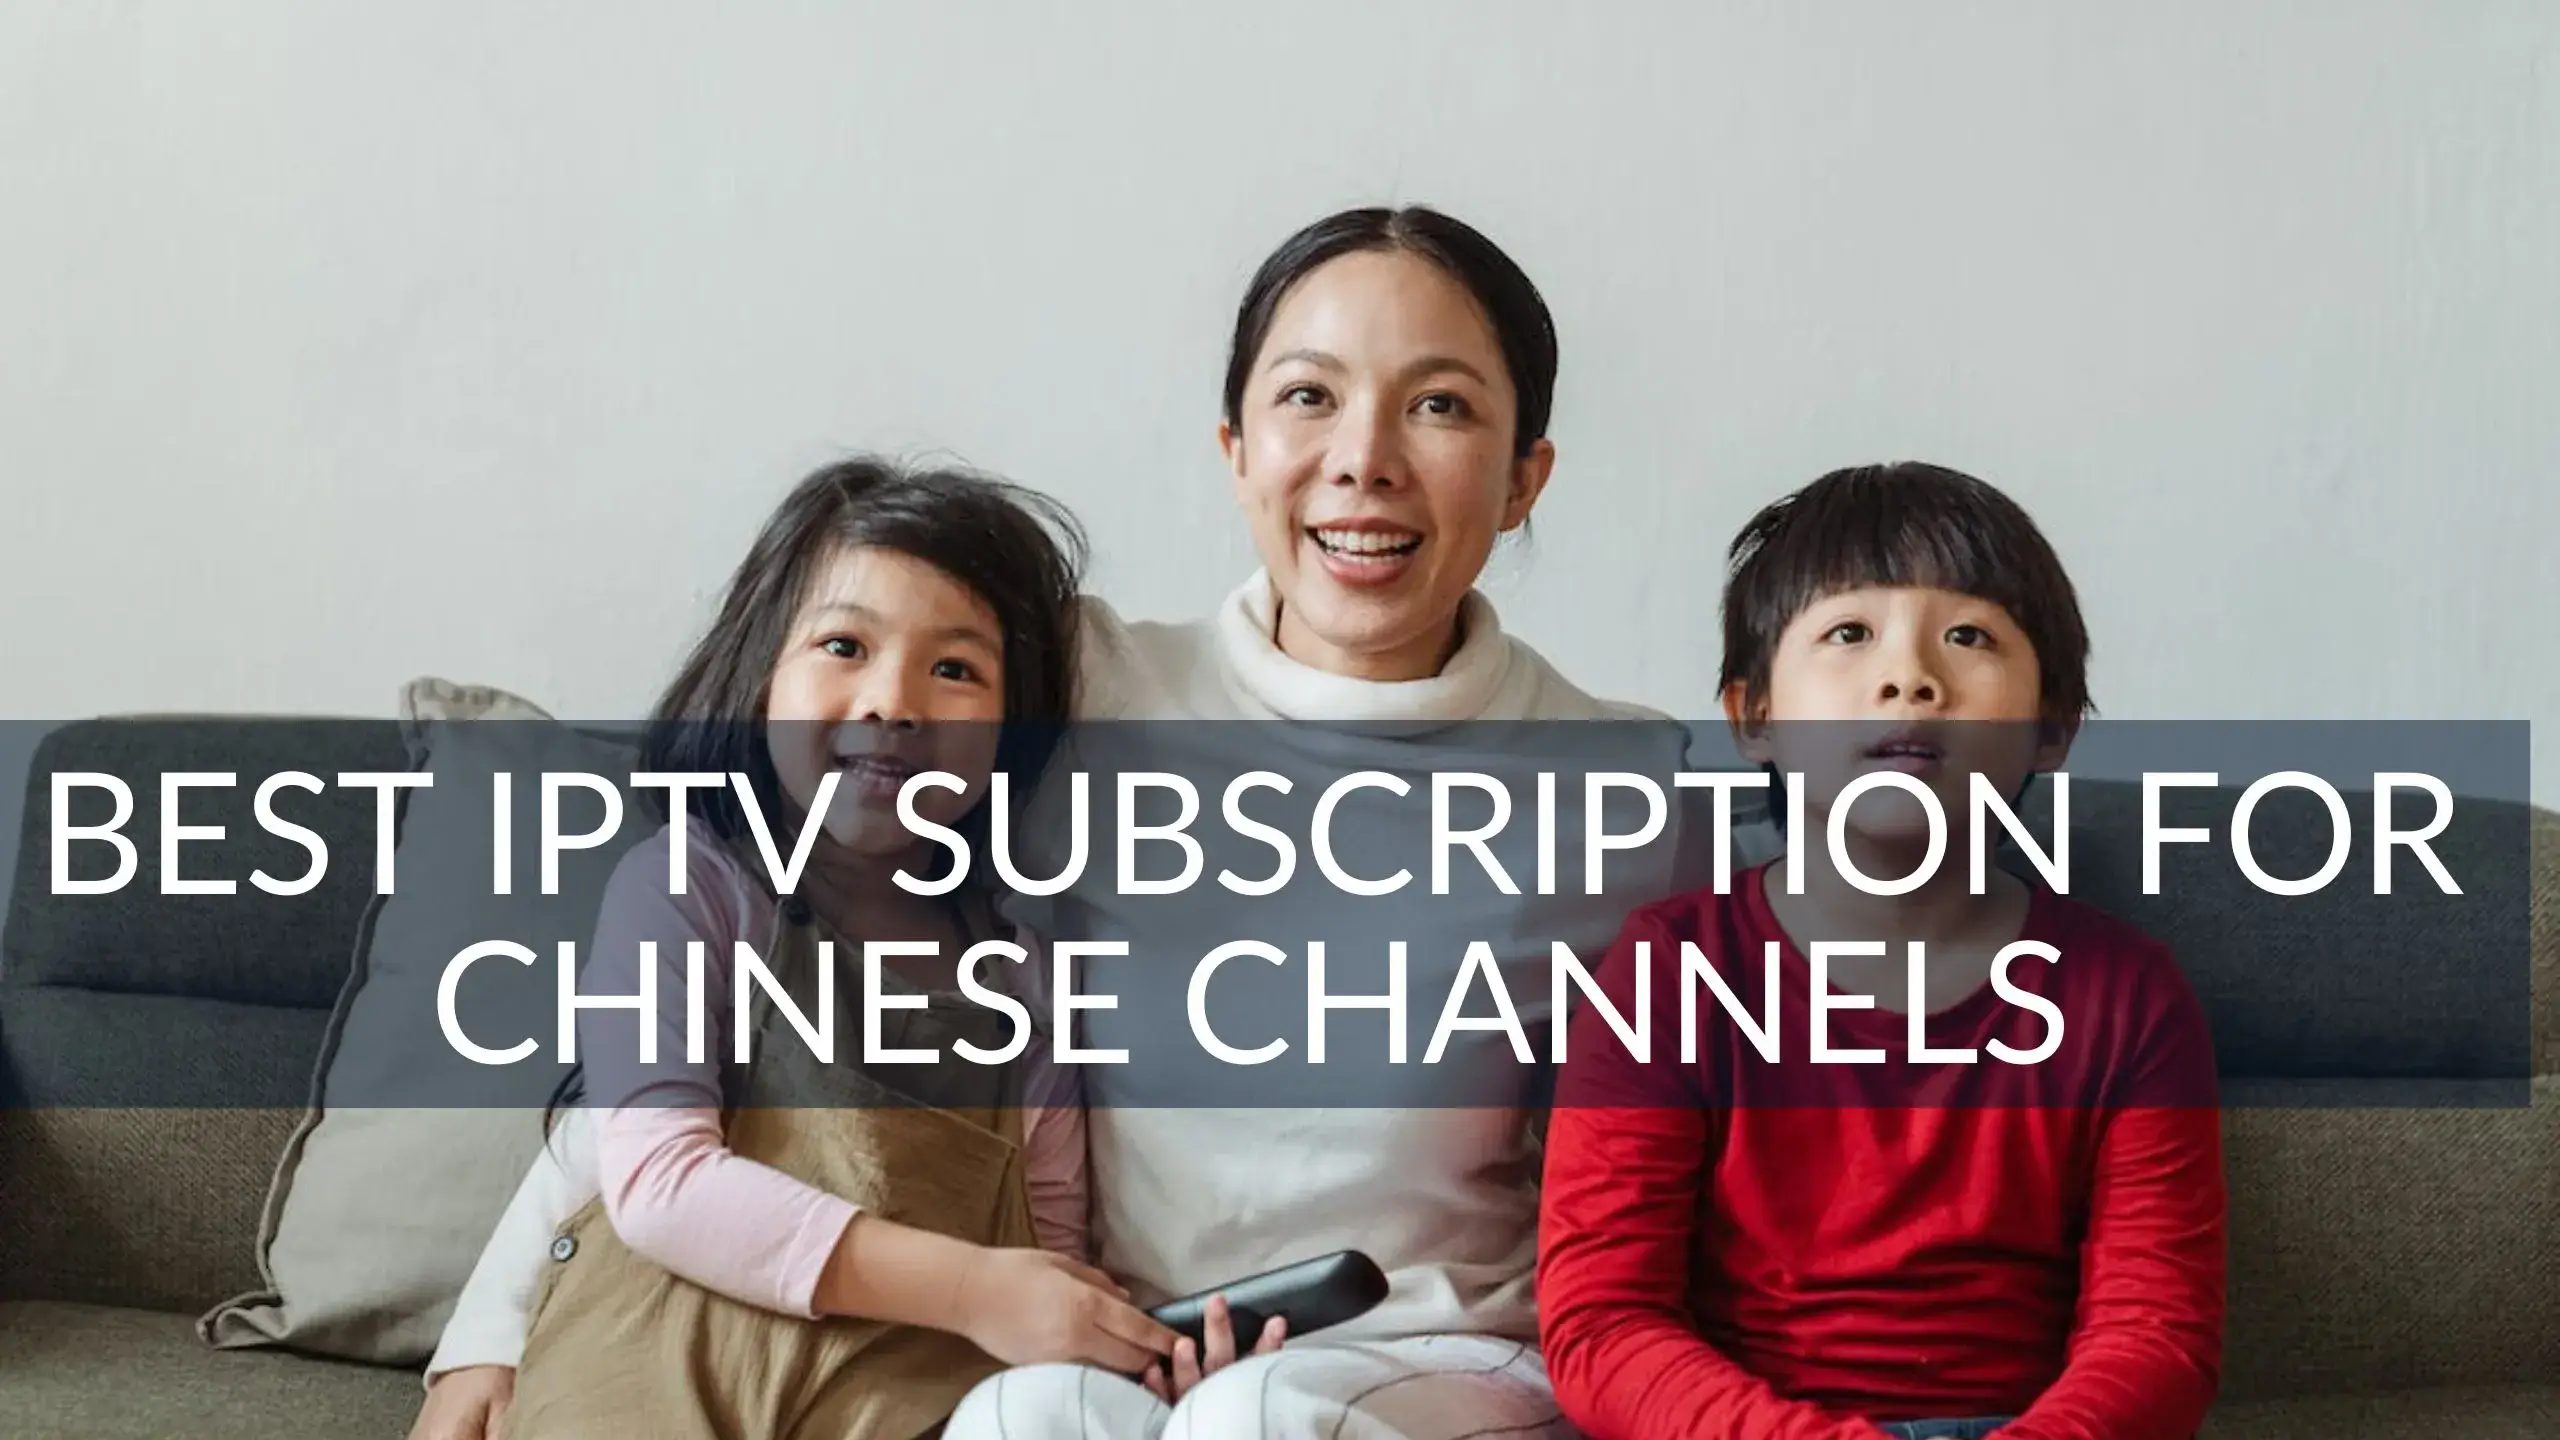 Best IPTV Subscription for Chinese Channels